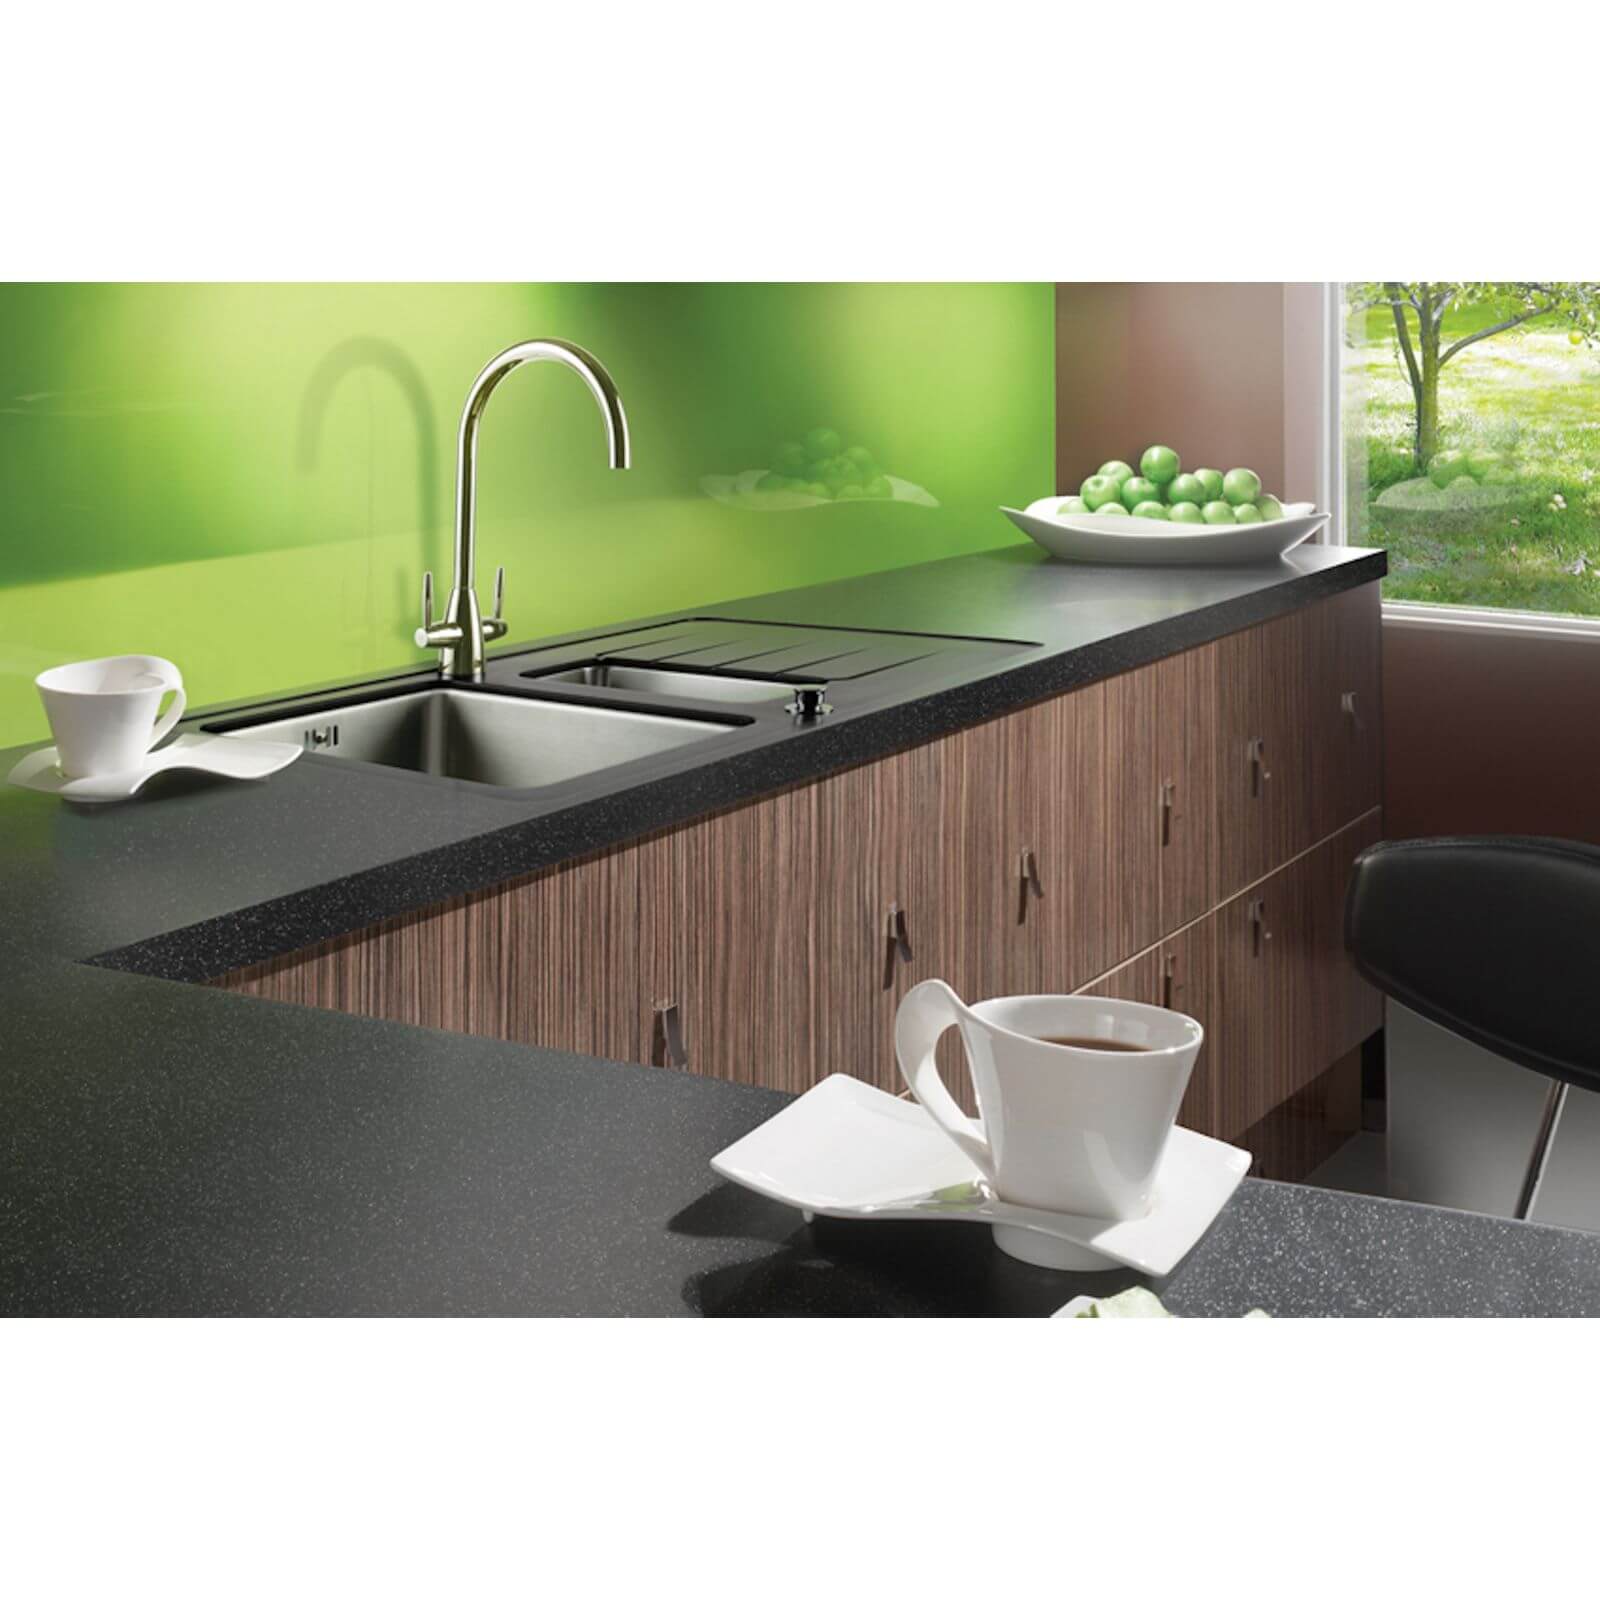 Maia Galaxy Kitchen Sink Worktop - Acrylic Super Large Right Hand Bowl - 1800 x 650 x 42mm